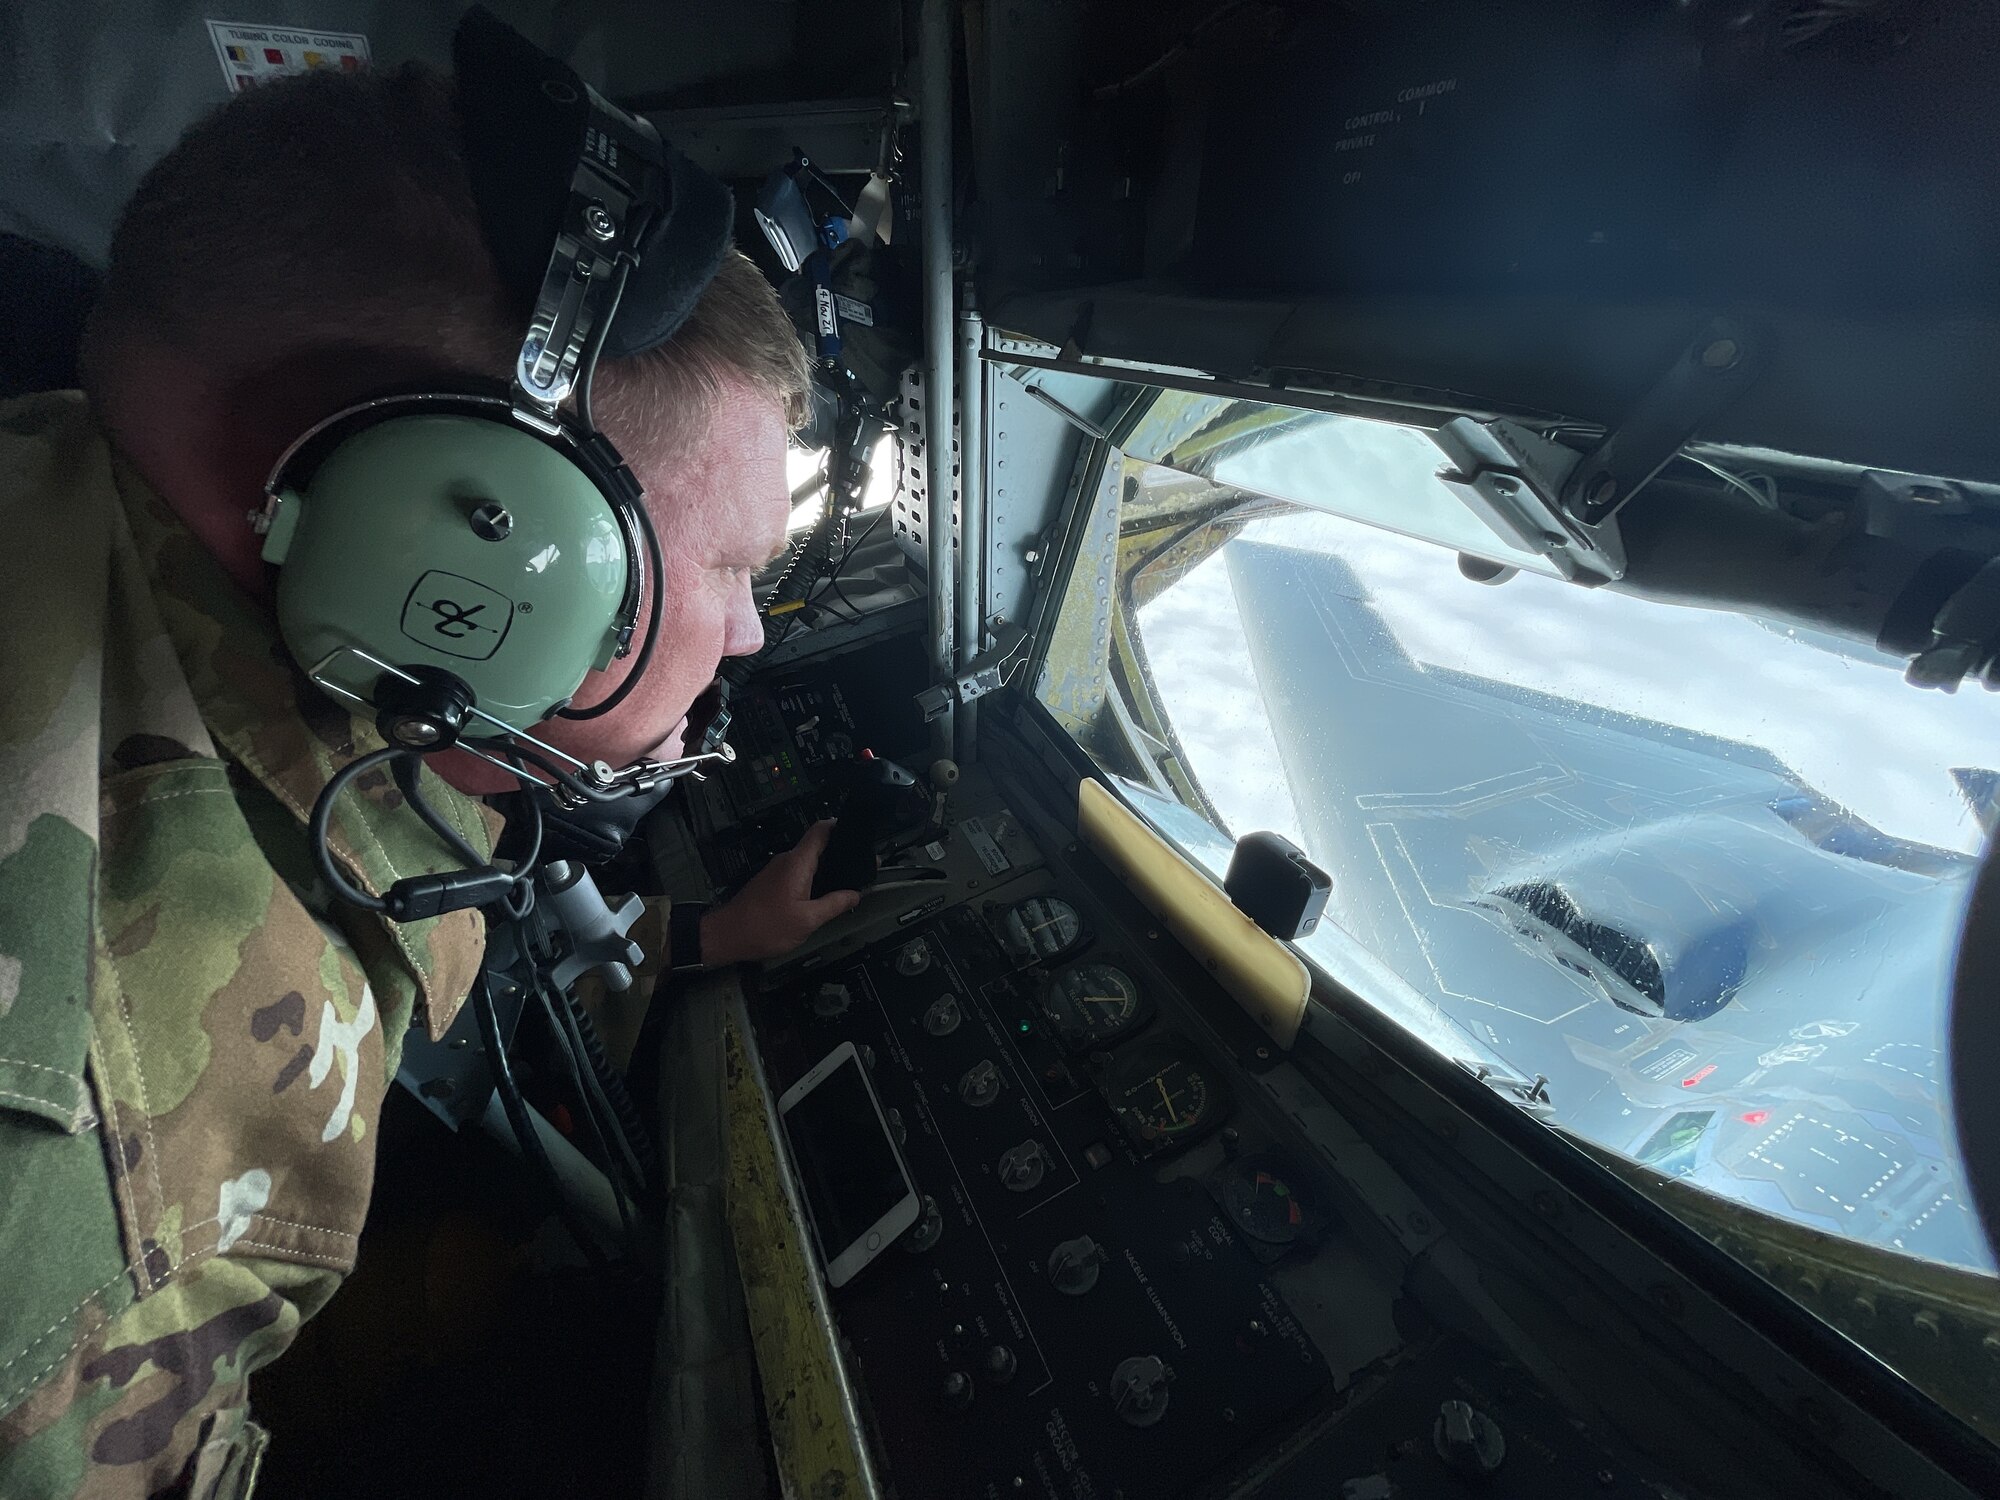 U.S. Air Force Master Sgt. Dustin Clark, Headquarters U.S. Air Forces in Europe standards and evaluations command air refueling evaluator, refuels a B-2 Spirit aircraft assigned to the 509th Bomb Wing, Whiteman Air Force Base, Missouri, over Europe during a bomber task force mission Sept. 8, 2021. U.S. bomber aircraft contribute to European regional security with the support of U.S. Air Forces in Europe and Air Forces Africa’s only permanent air refueling wing. (U.S. Air Force photo by Senior Airman Joseph Barron)